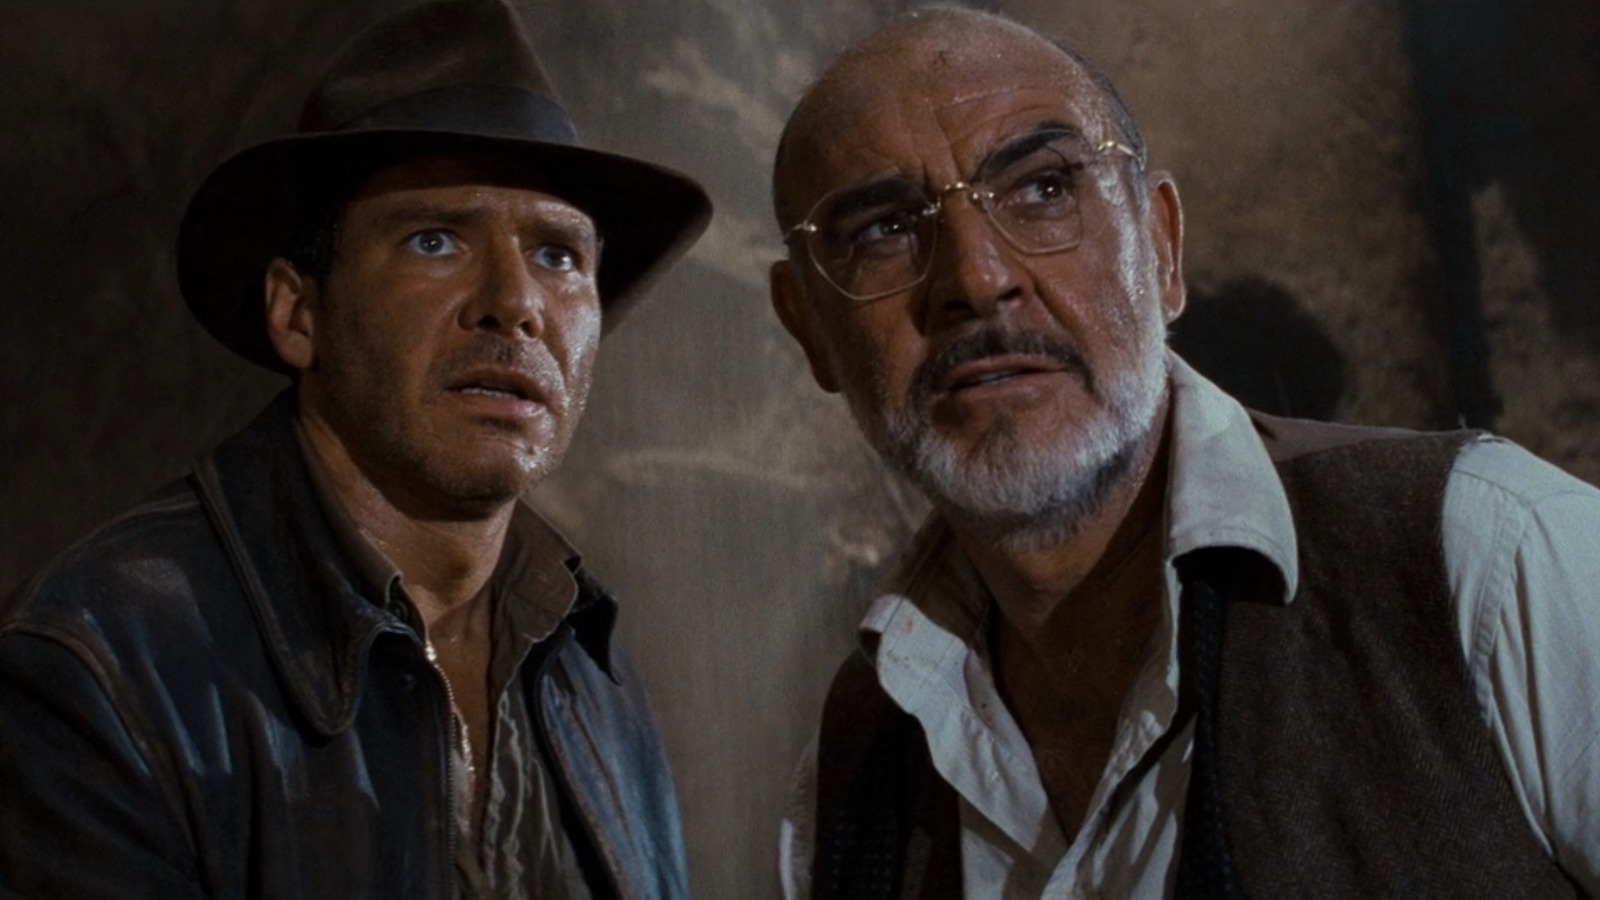 You Chose Wisely: Why The Last Crusade Is Indiana Jones’ Greatest Film